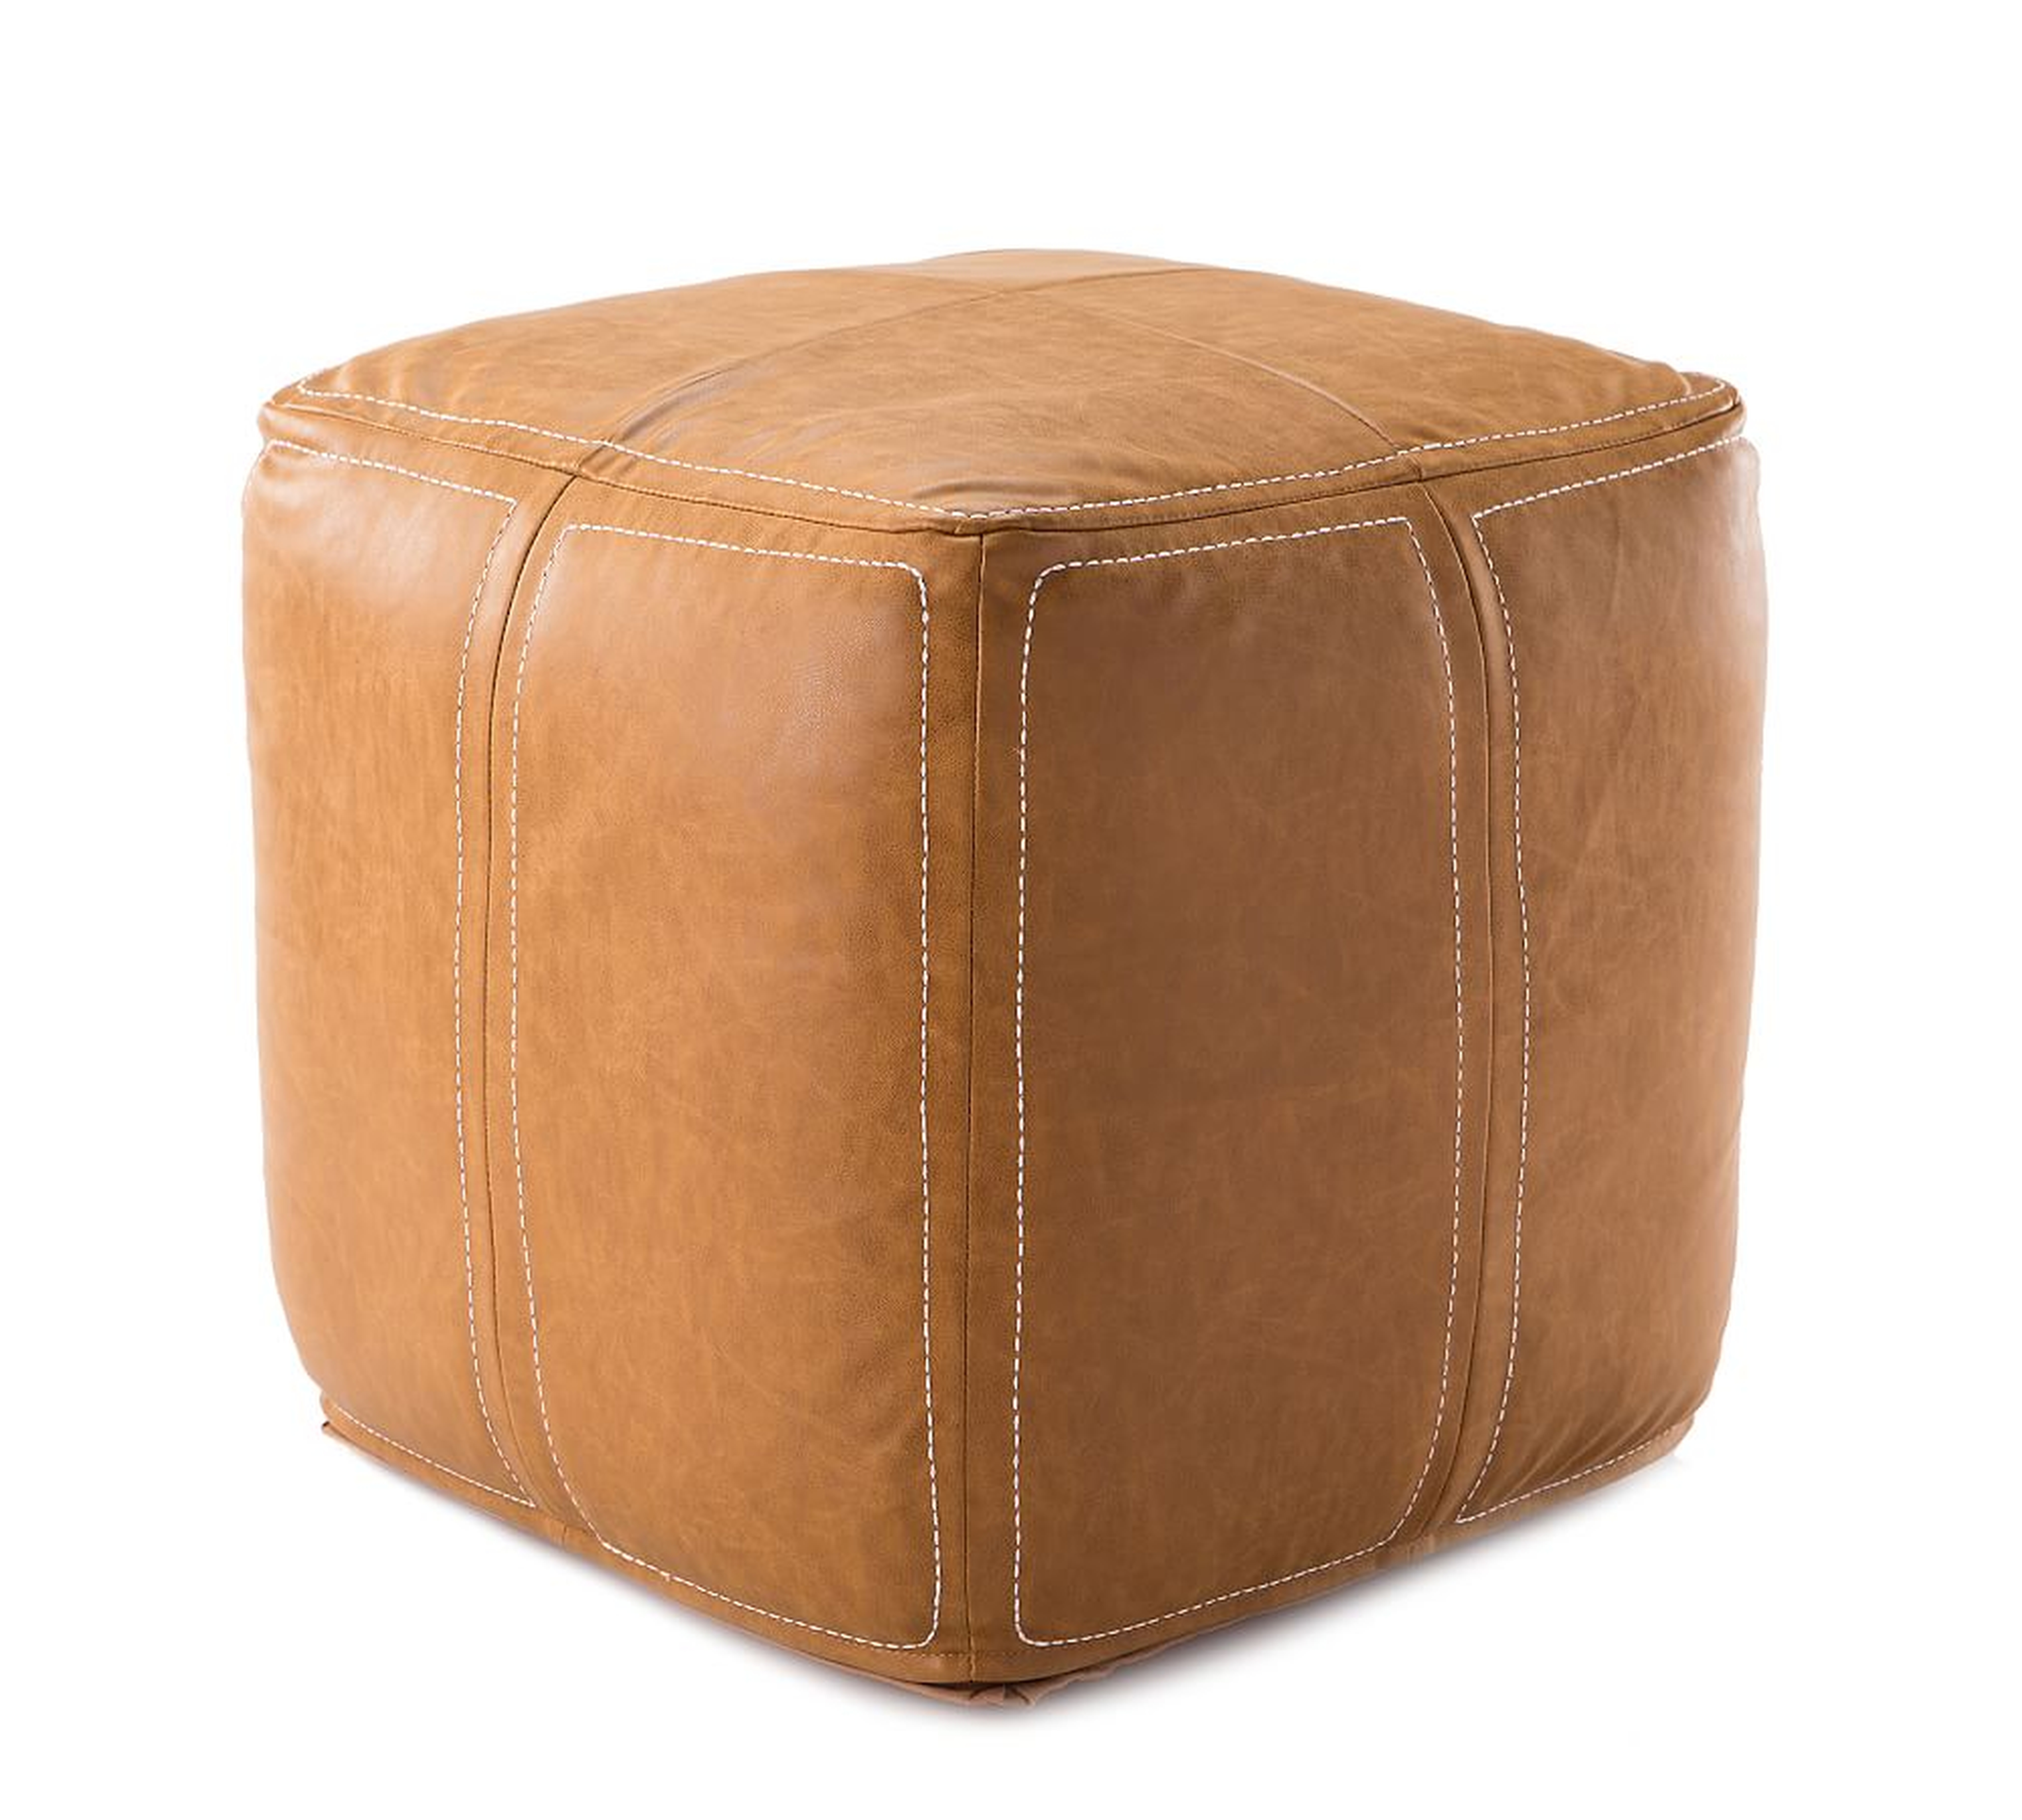 Faux Leather Handwoven Pouf, 18" x 18" x 18", Camel - Pottery Barn